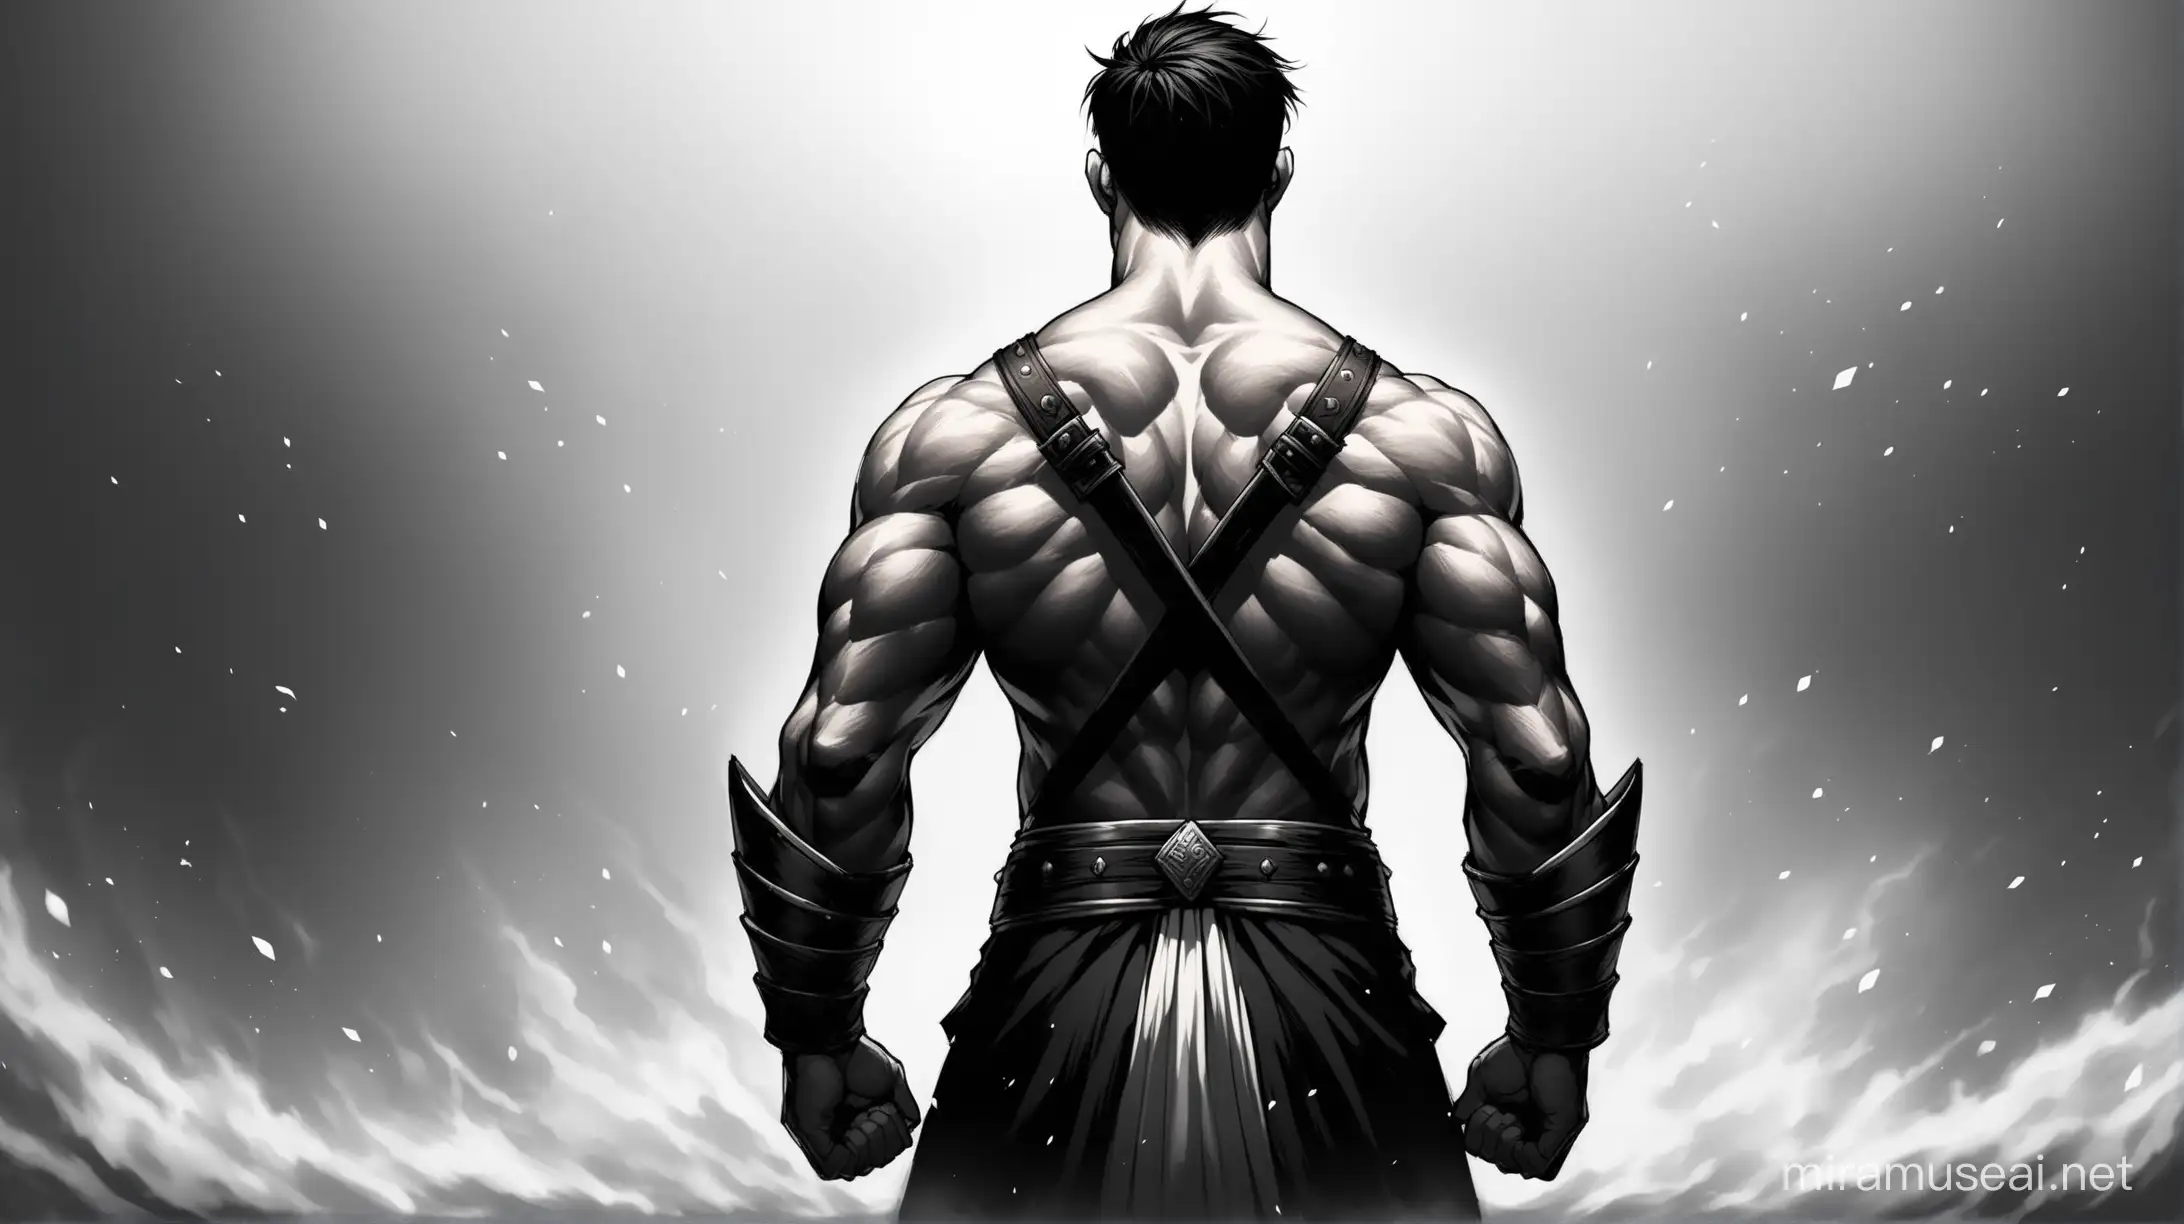 alone Muscular Warrior Standing turned back with Swards in his both hands and the background should be black and warrior image should be of white colour